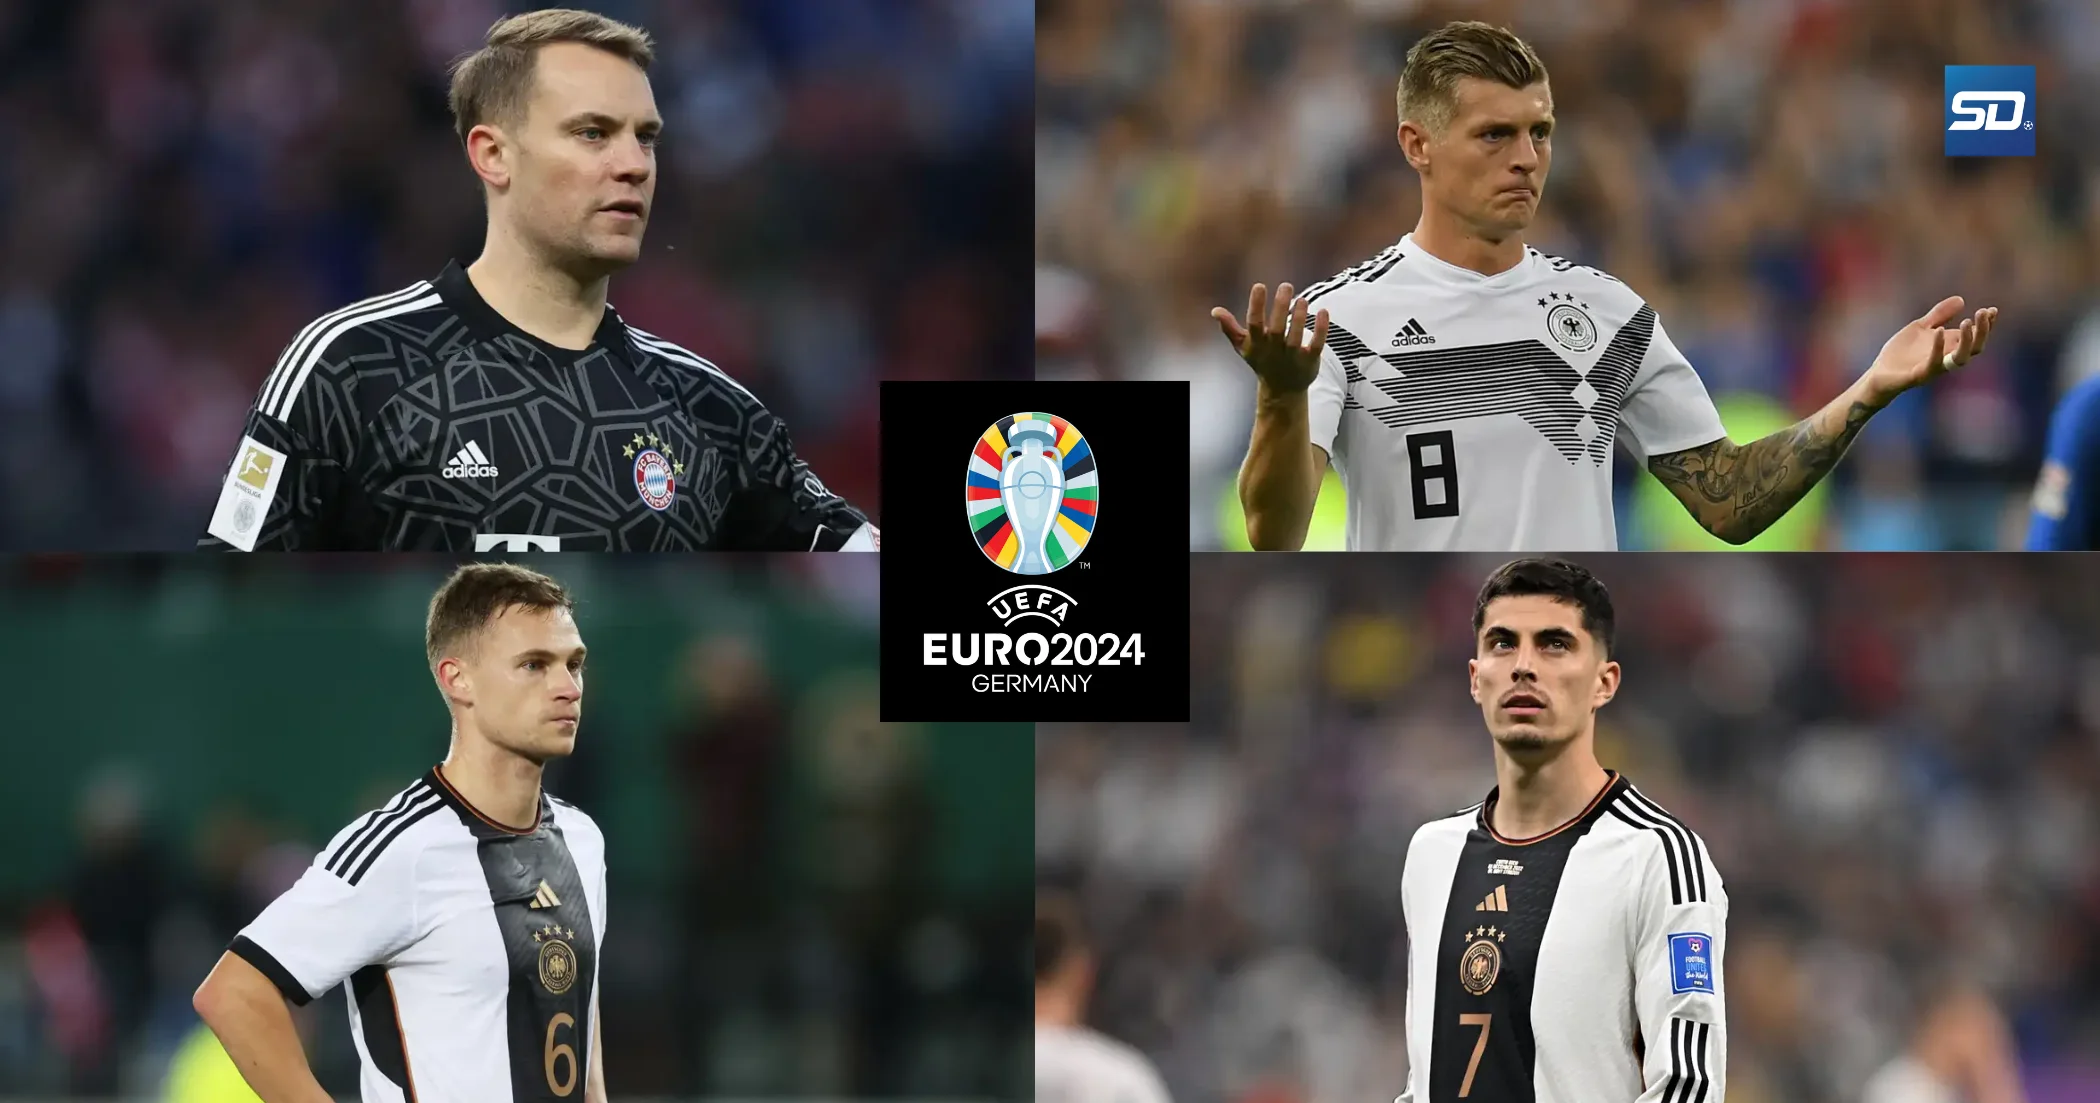 Germany Squad for Euro 2024: Who’s in and who’s out from the updated list of players?